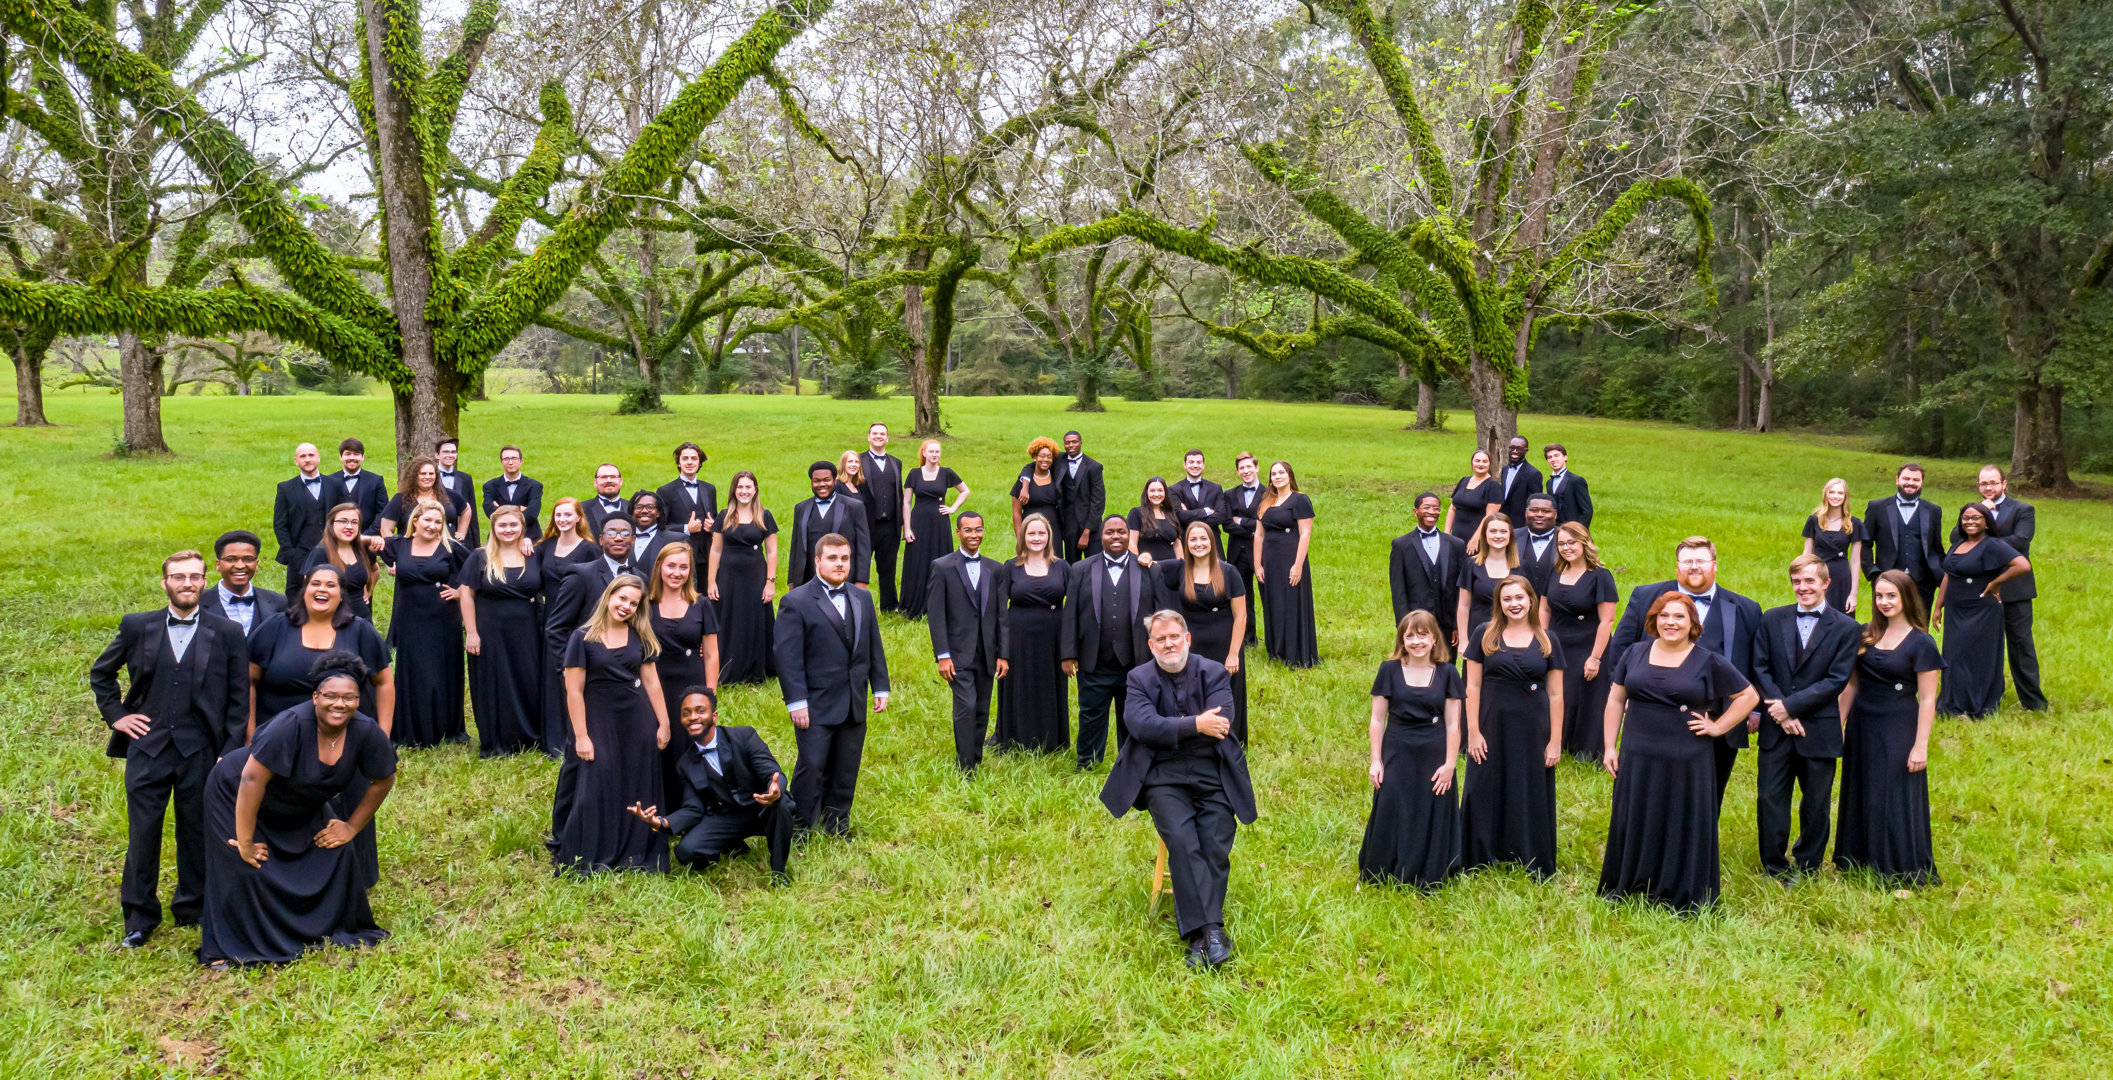 The Southern Chorale